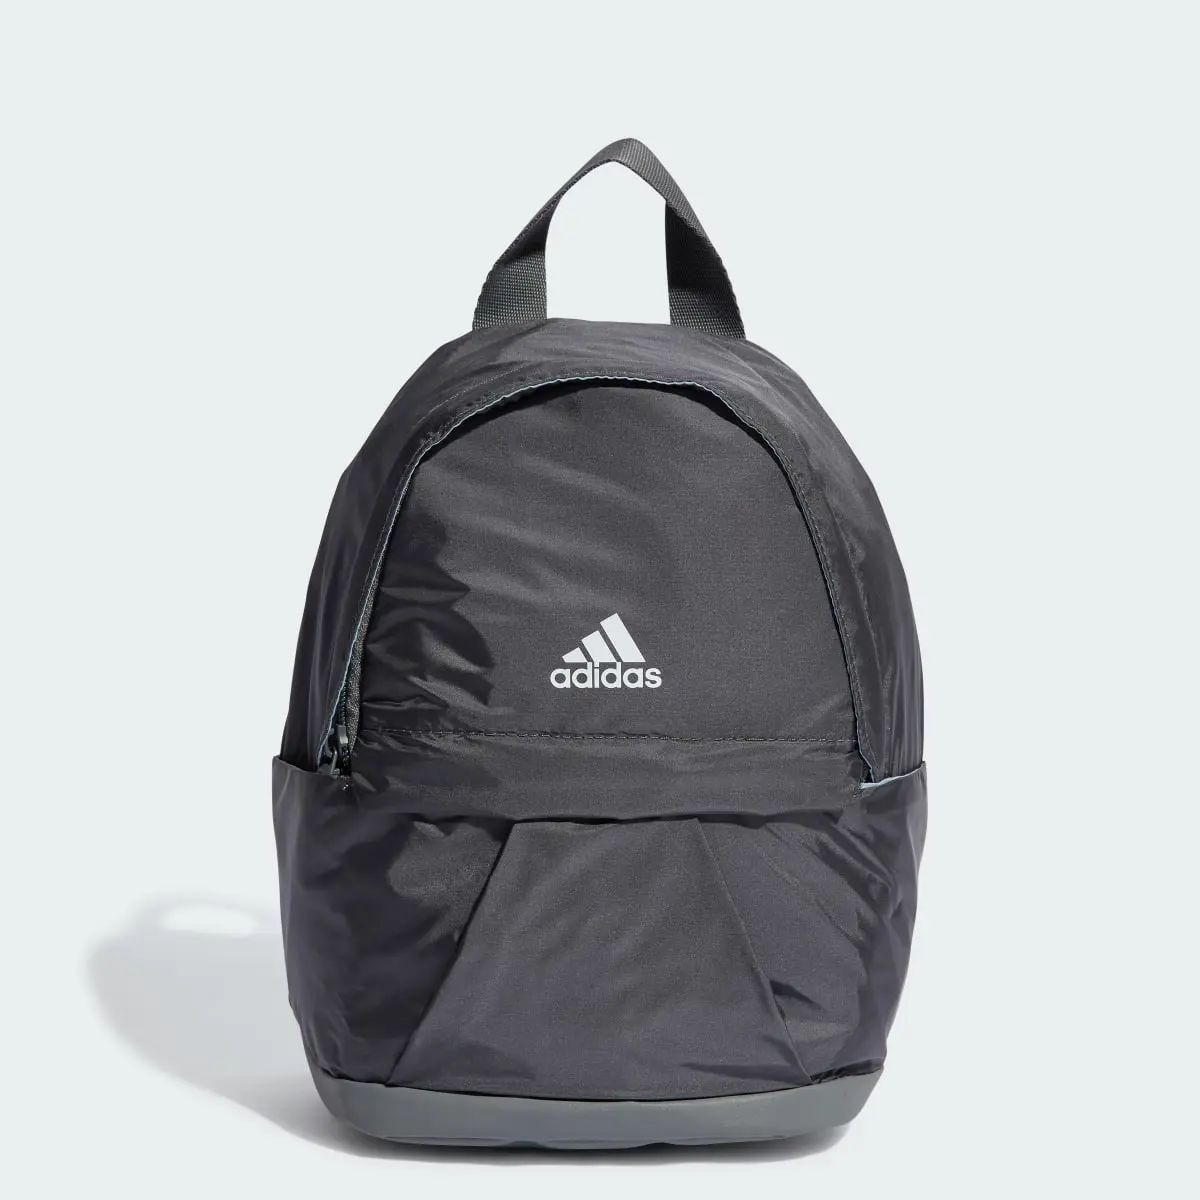 Adidas Classic Gen Z Backpack Extra Small. 1